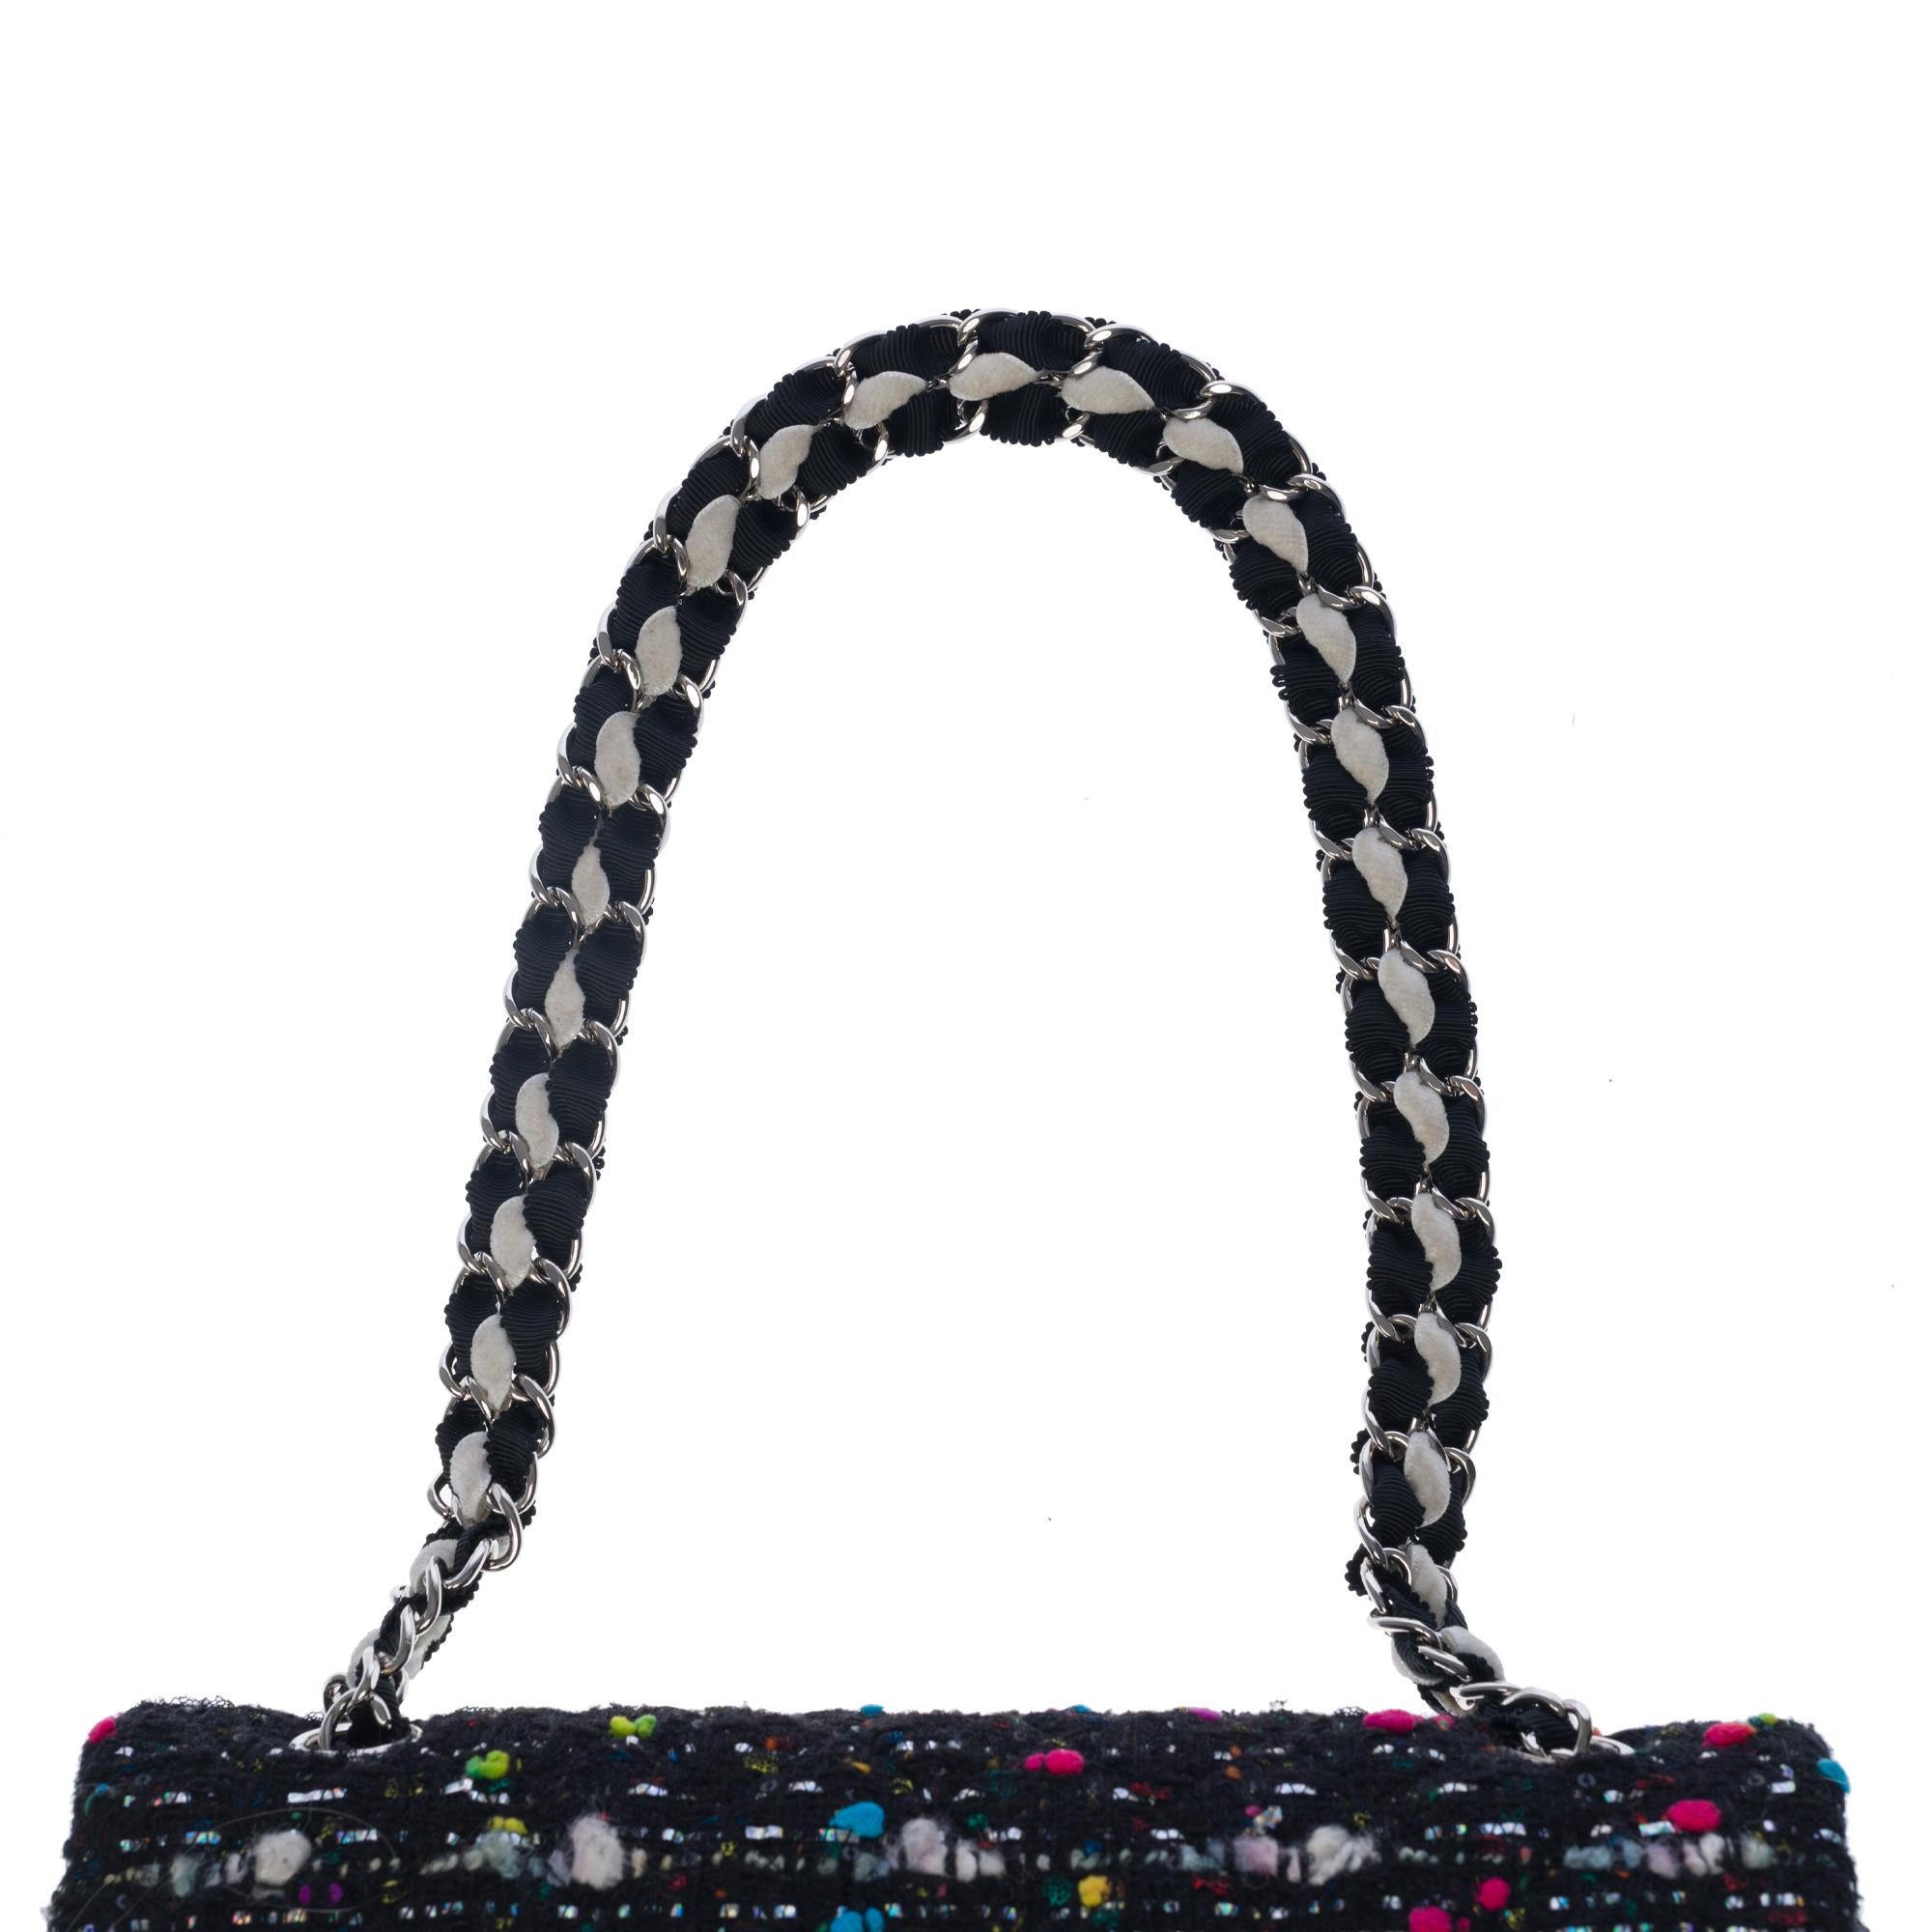 Limited Edition Chanel Timeless Shoulder bag in Multicolor Tweed with SHW 4